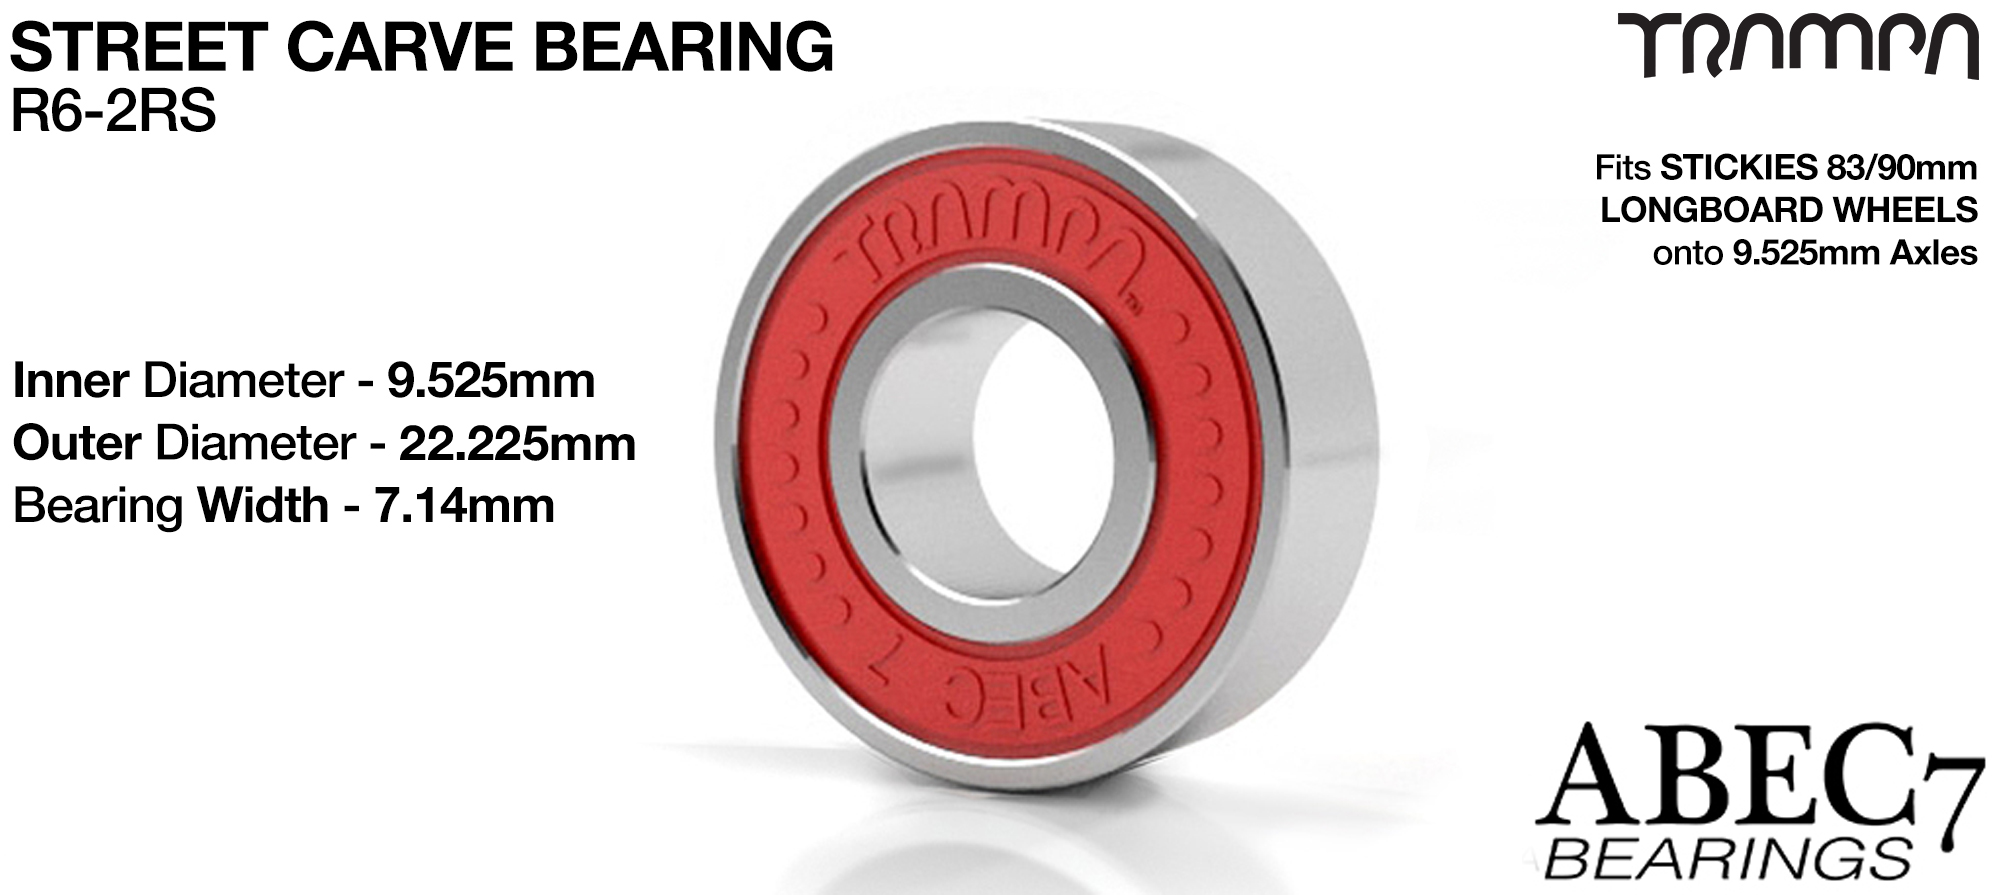 ABEC 7 R6-2RS 9.525mm Bearings - RED (+£5)